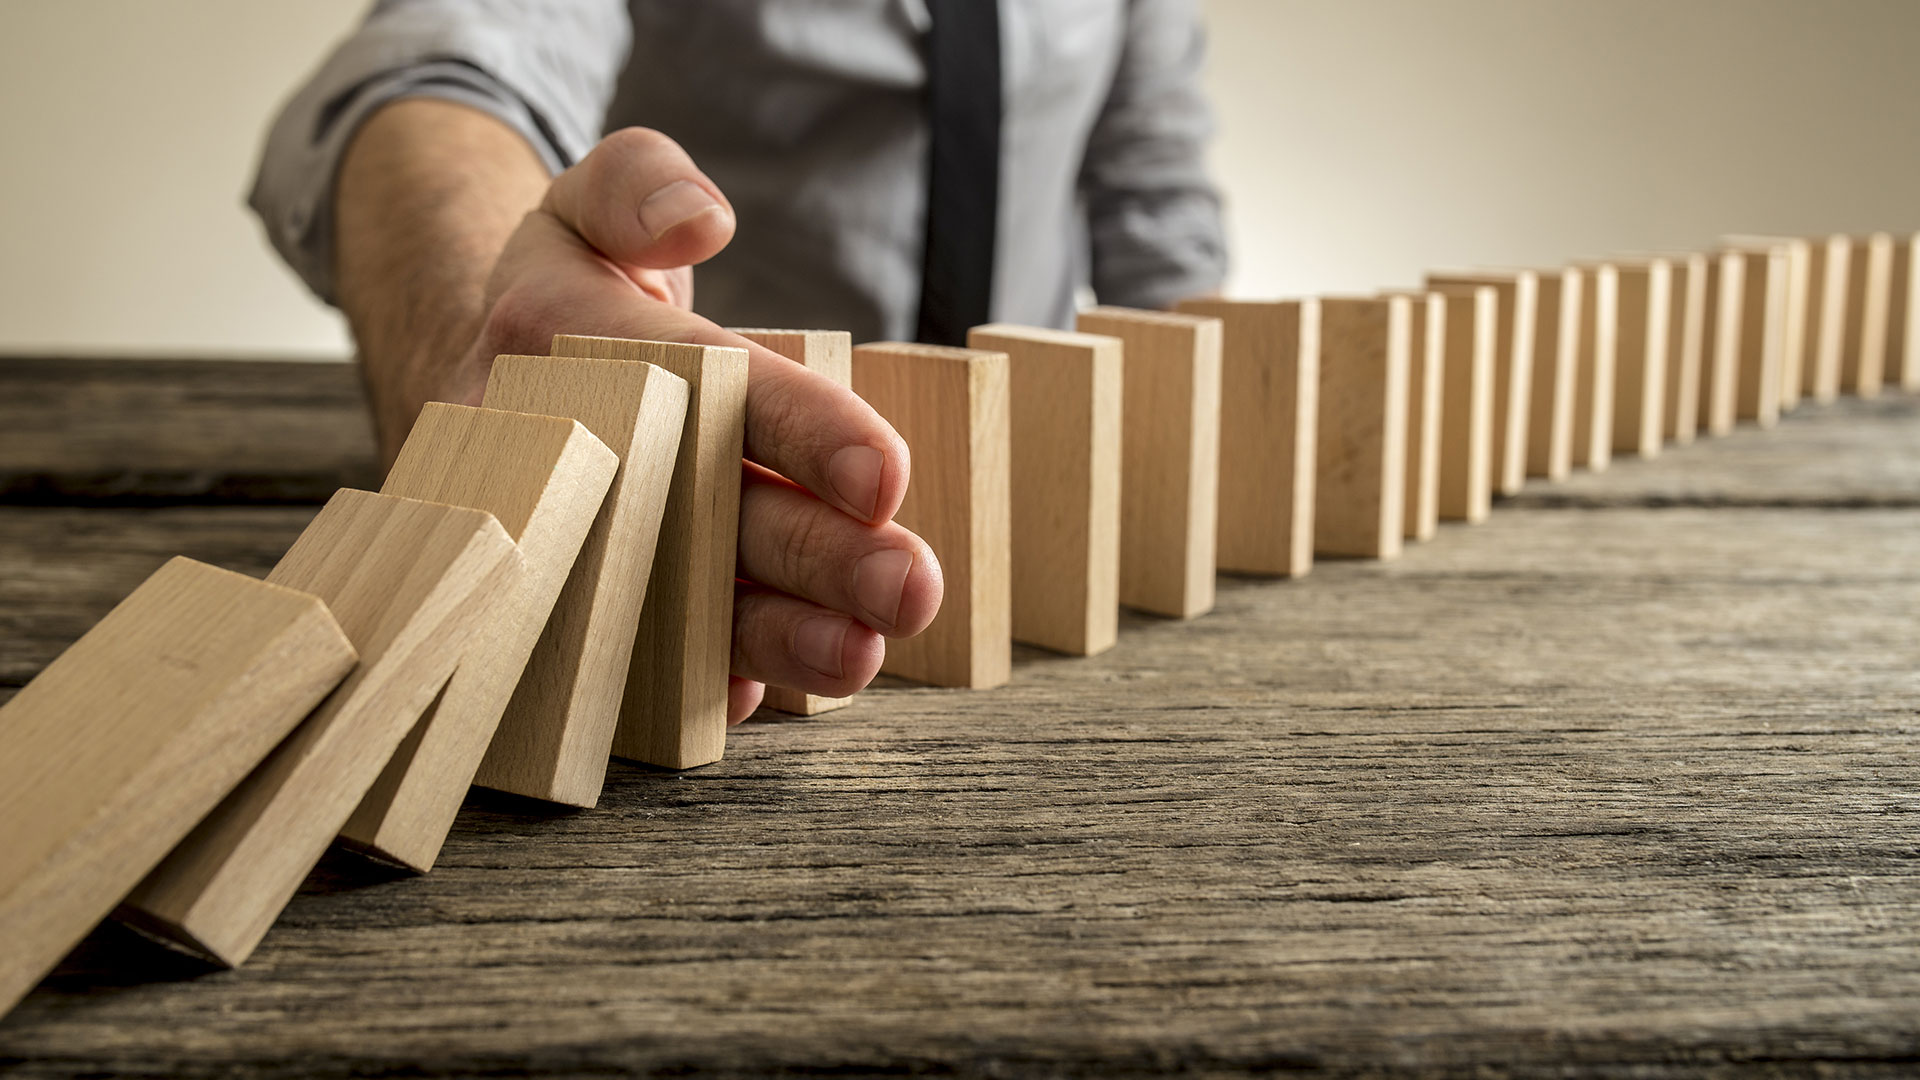 Why are risk assessments so important? A man's hand stops a domino effect on a wooden table